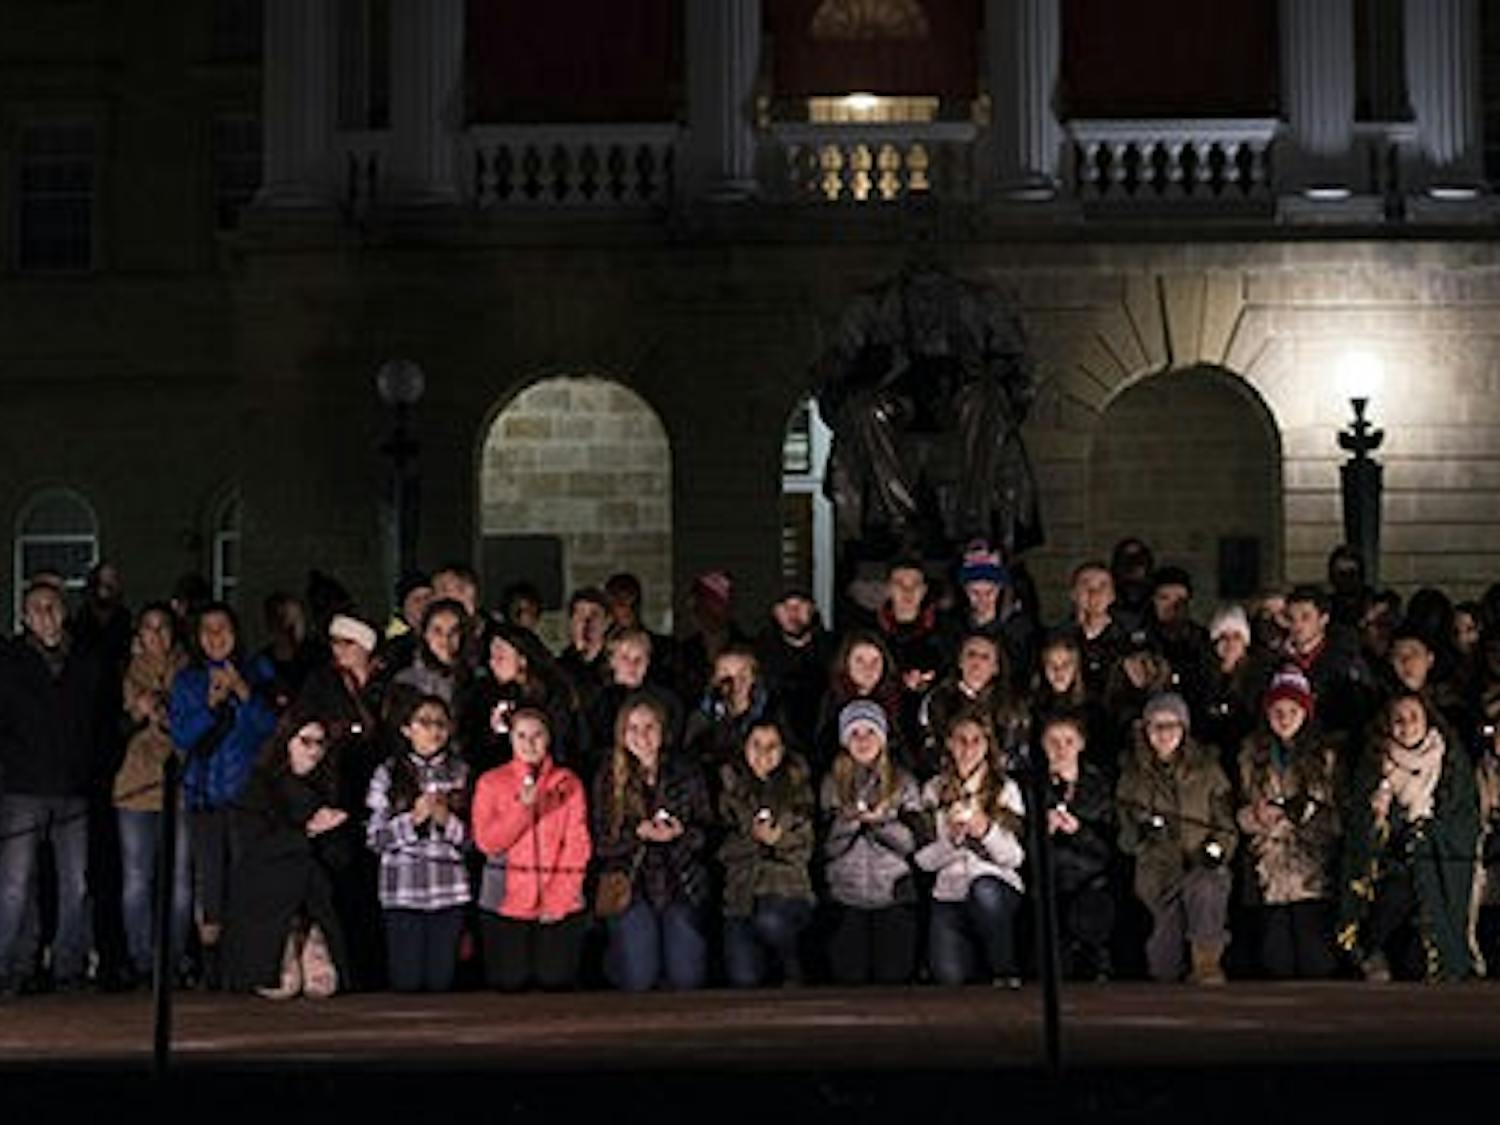 Students at UW-Madison gathered on Bascom Hill in mourning of the recent terrorist attacks in Paris. This display of solidarity stands in contrast to the political commentary and bashing that has become common.